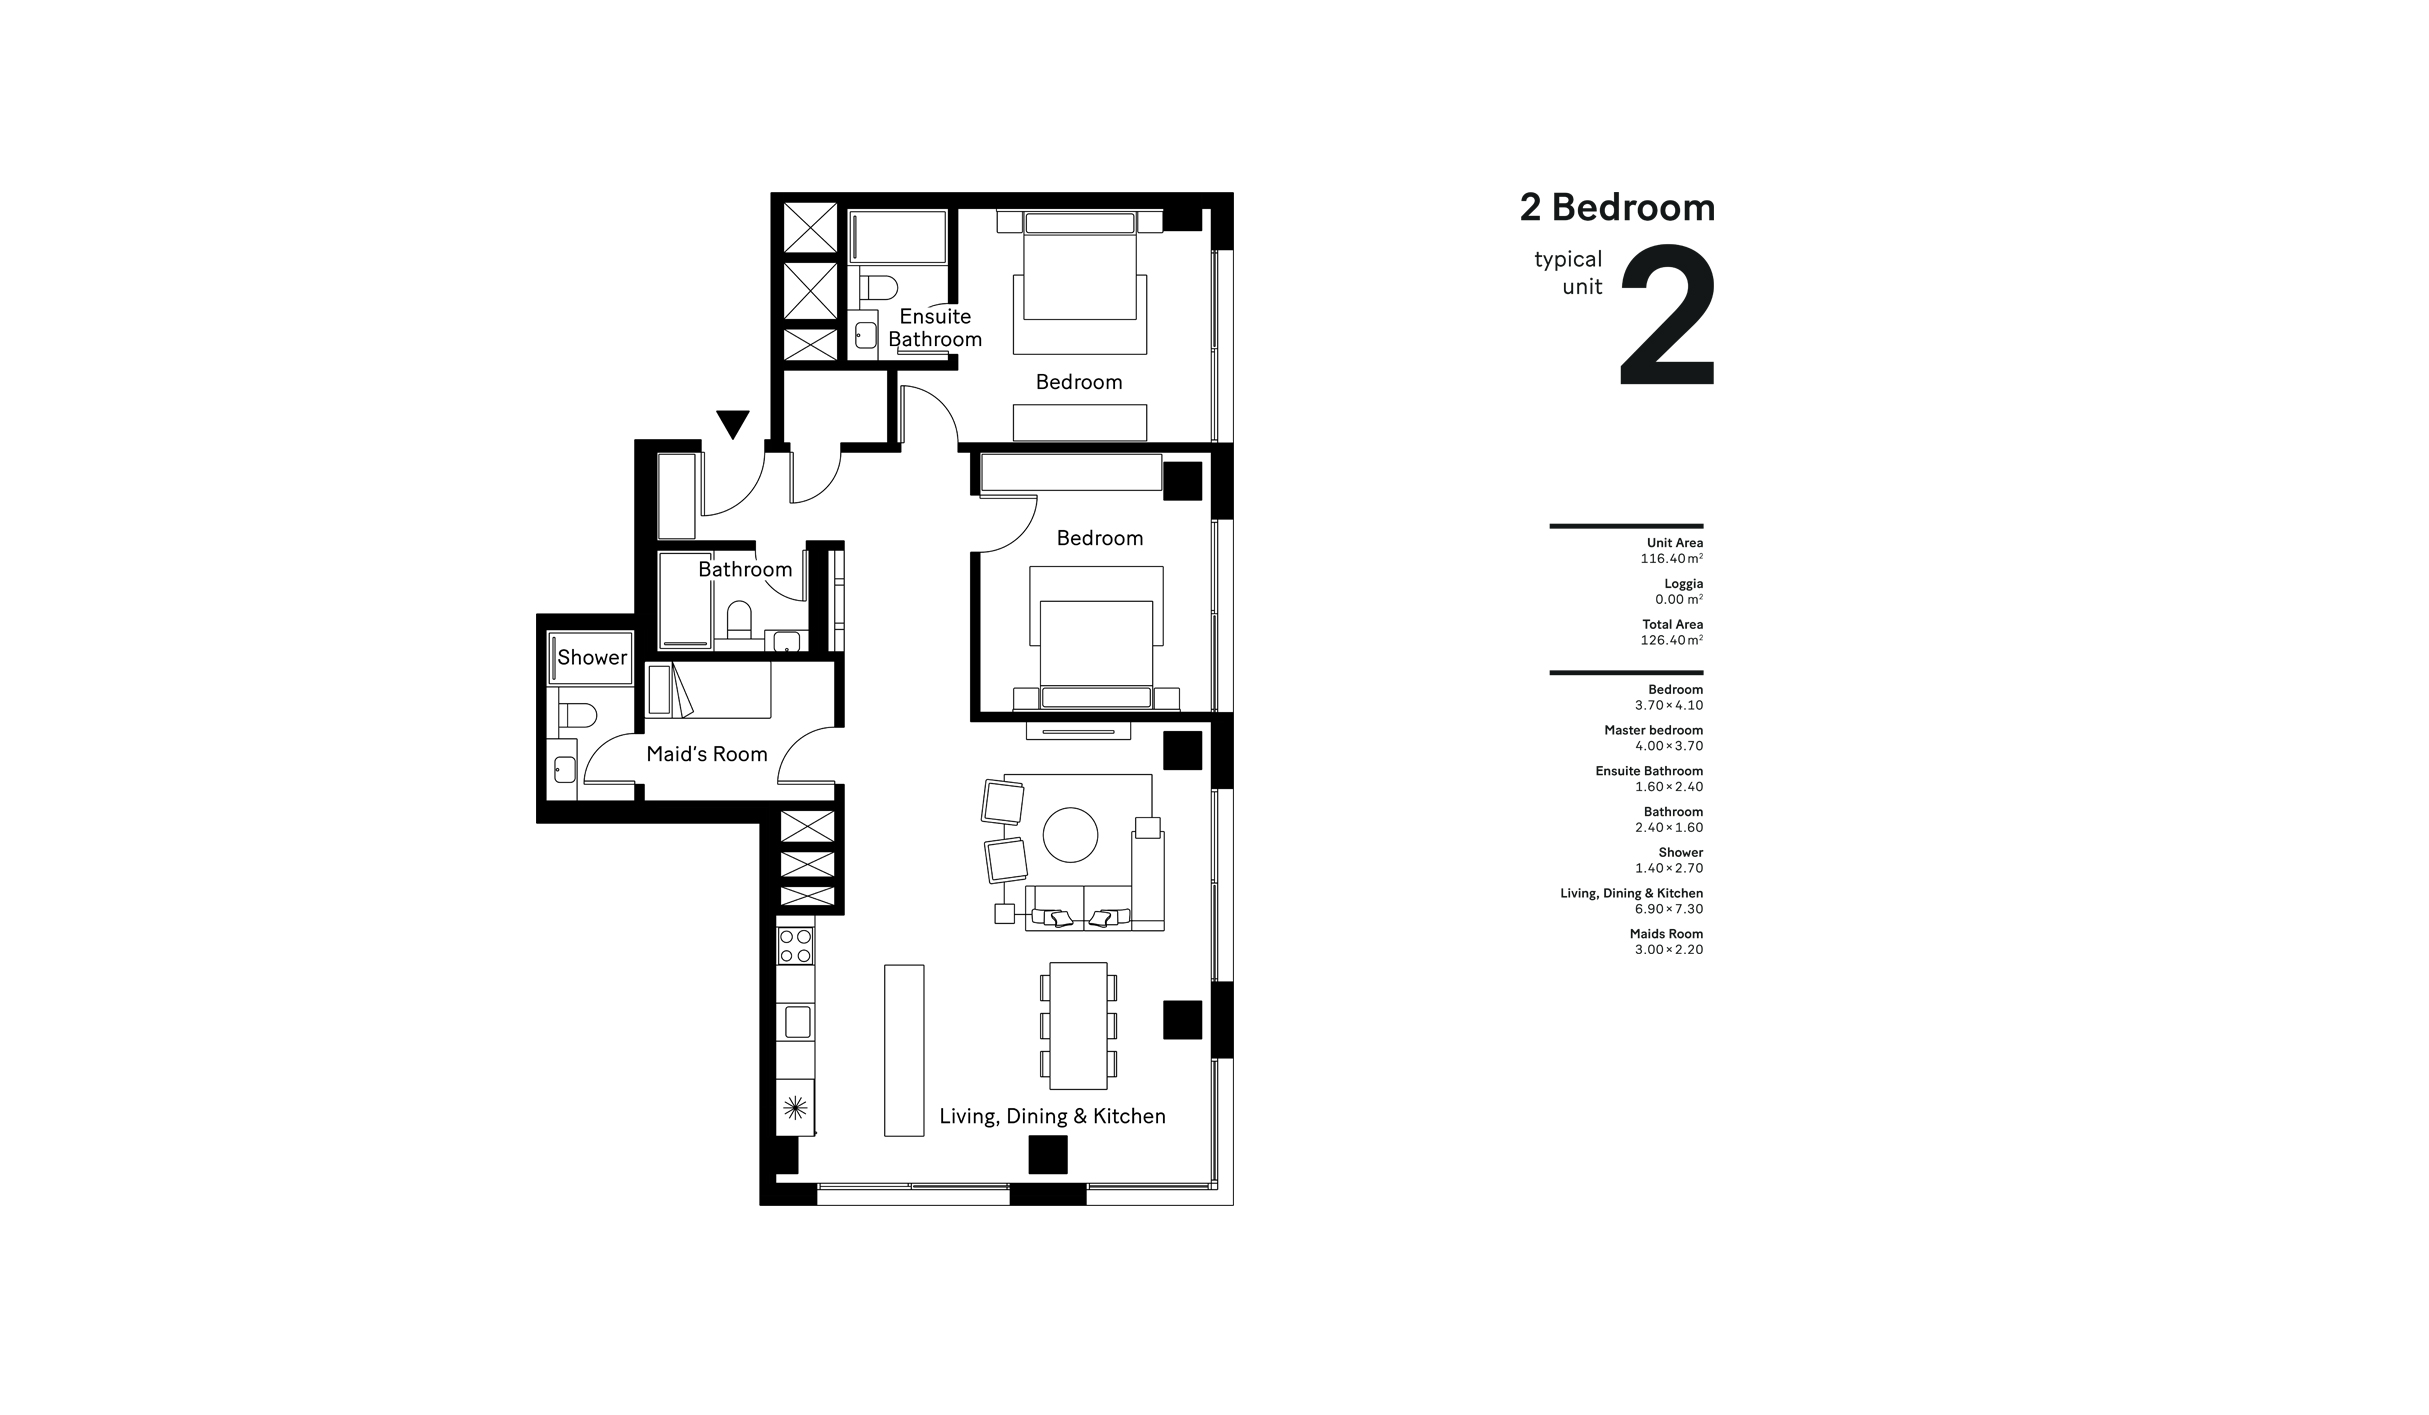 2 Bedroom, Typical Unit 2